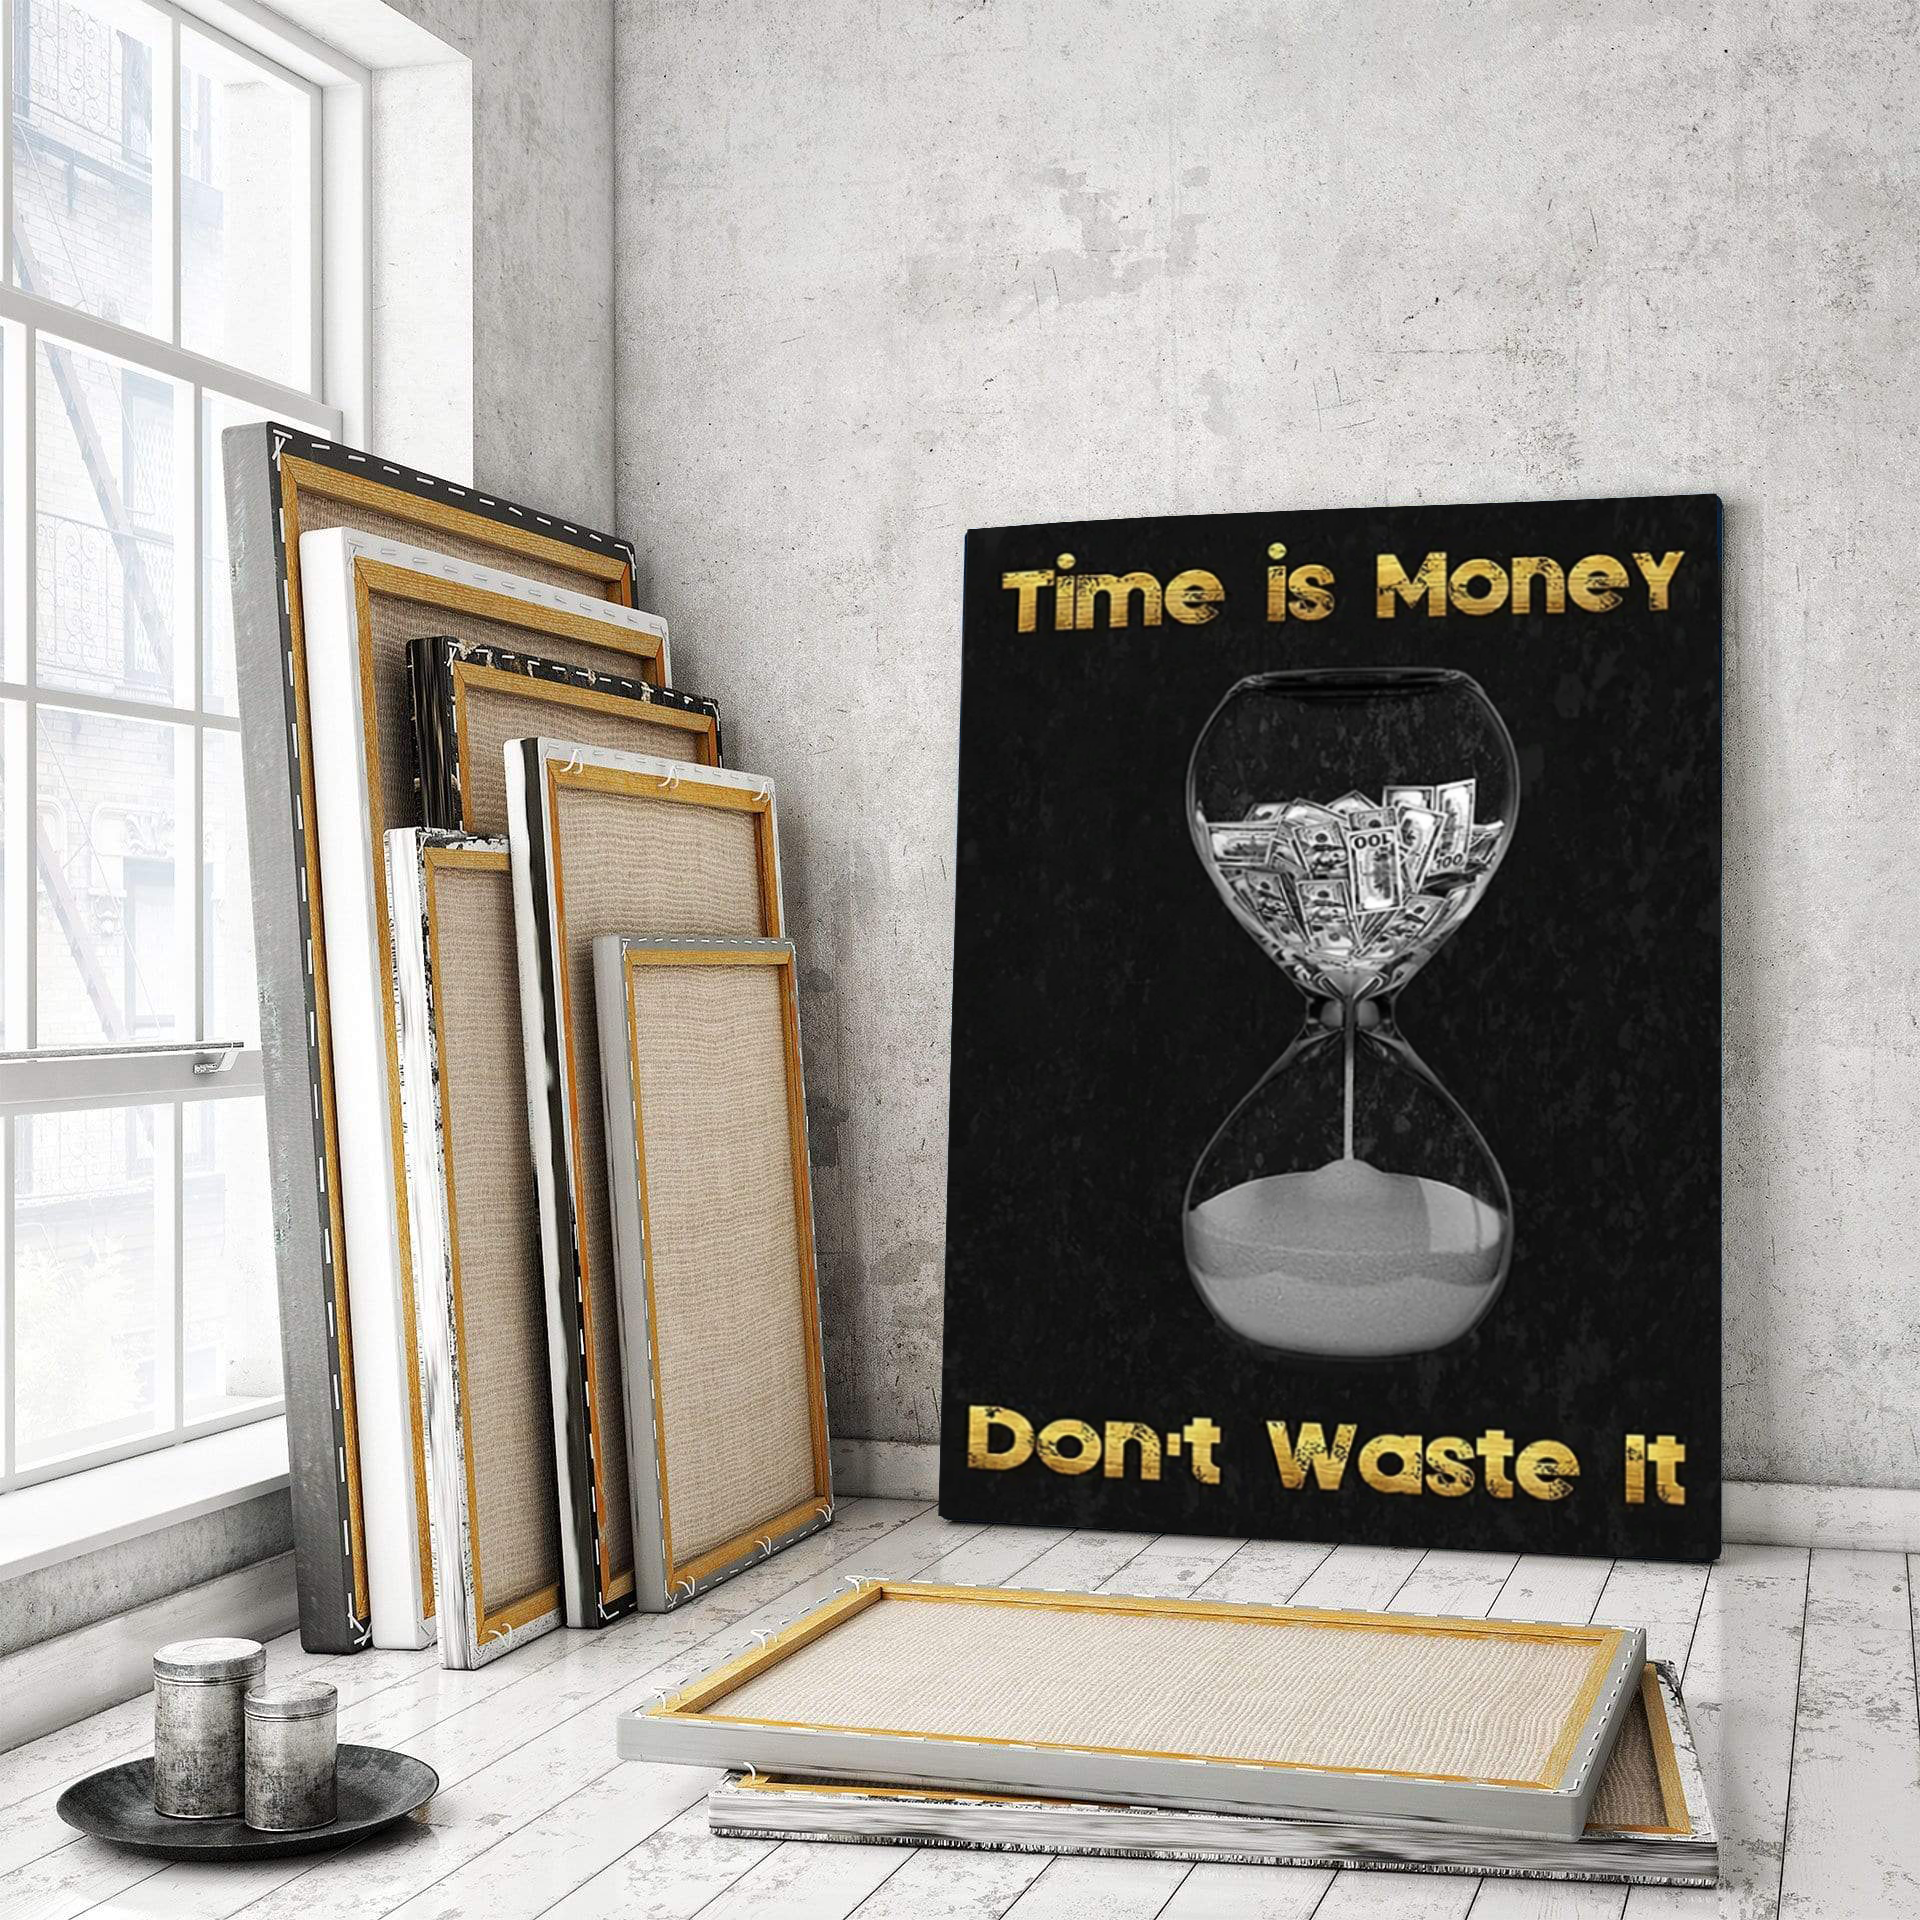 Time is Money Hour Glass